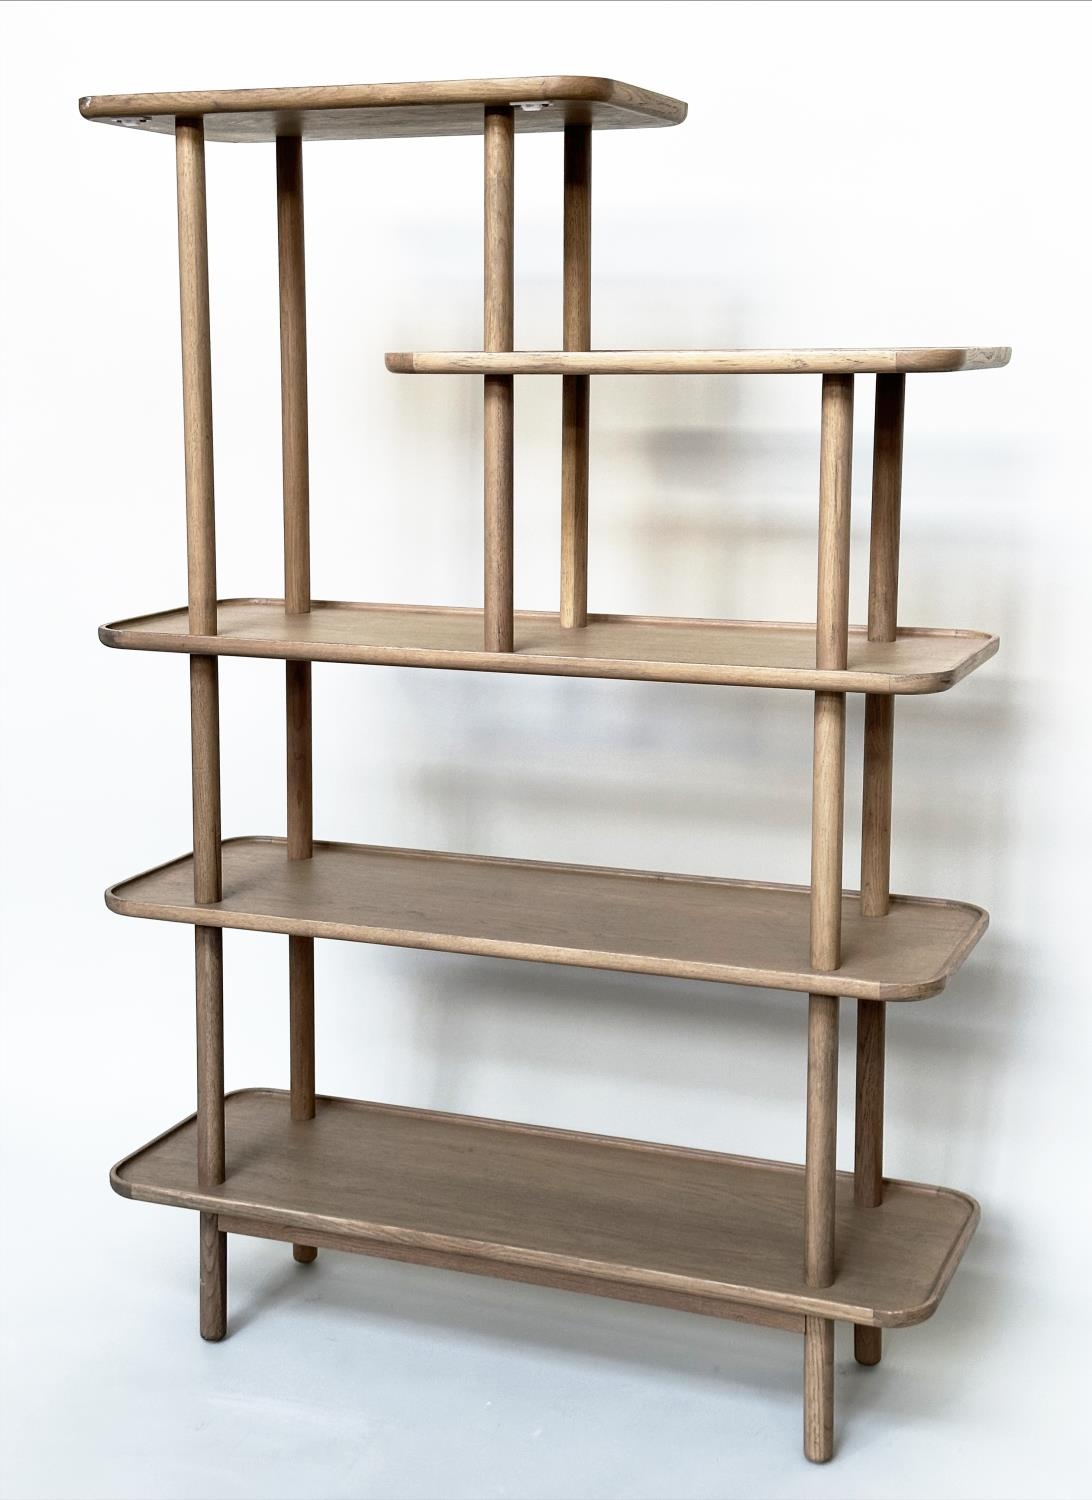 DISPLAY STAND, contemporary oak of five tiers, 164cm H x 110cm W x 39cm D. - Image 2 of 6